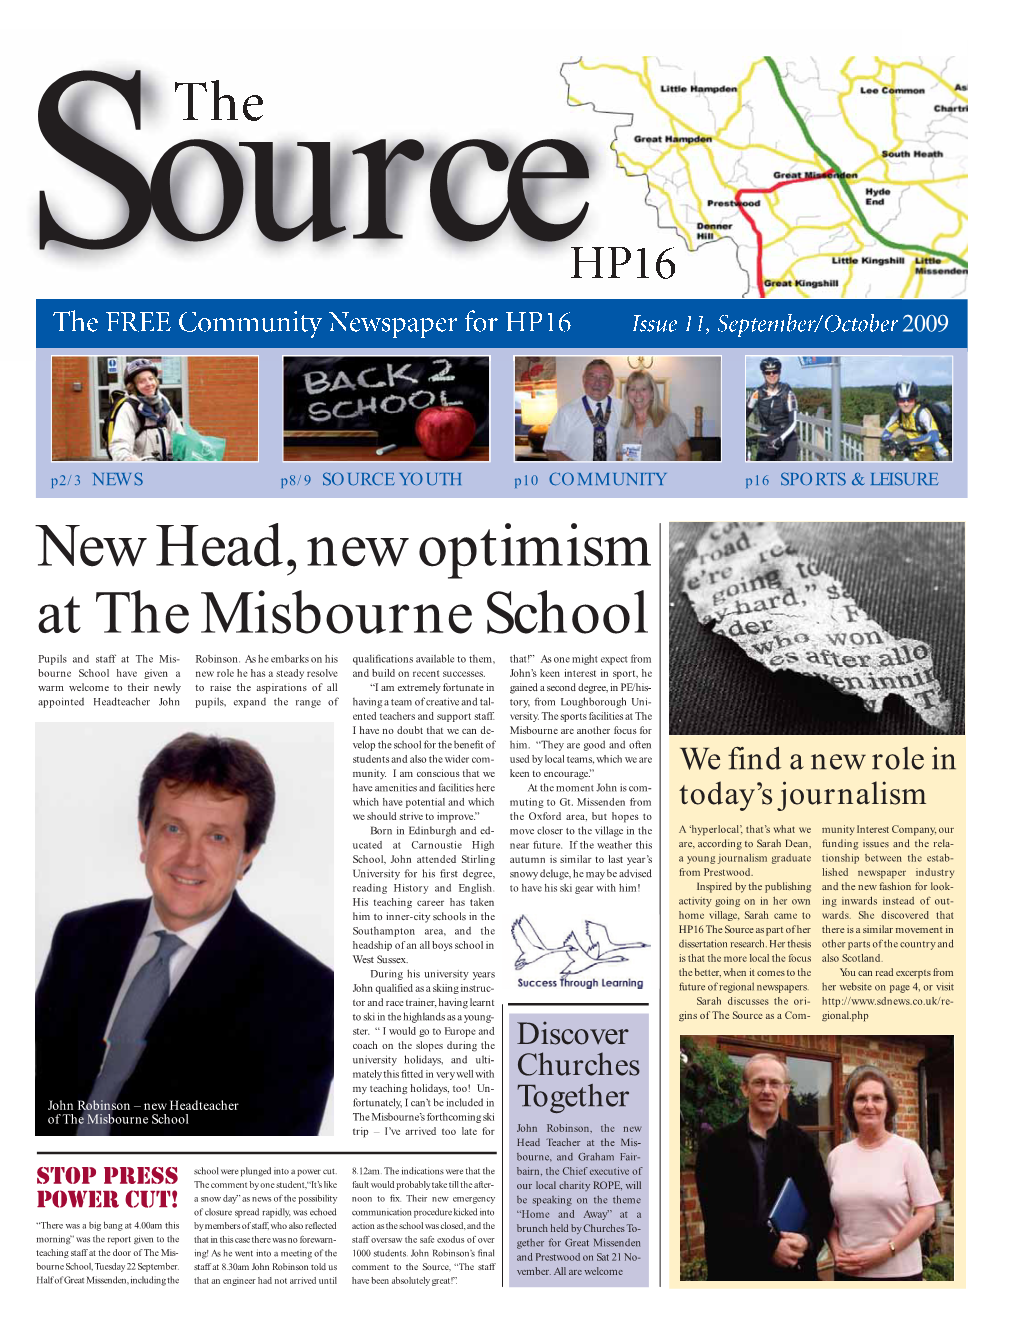 New Head, New Optimism at the Misbourne School Pupils and Staff at the Mis- Robinson